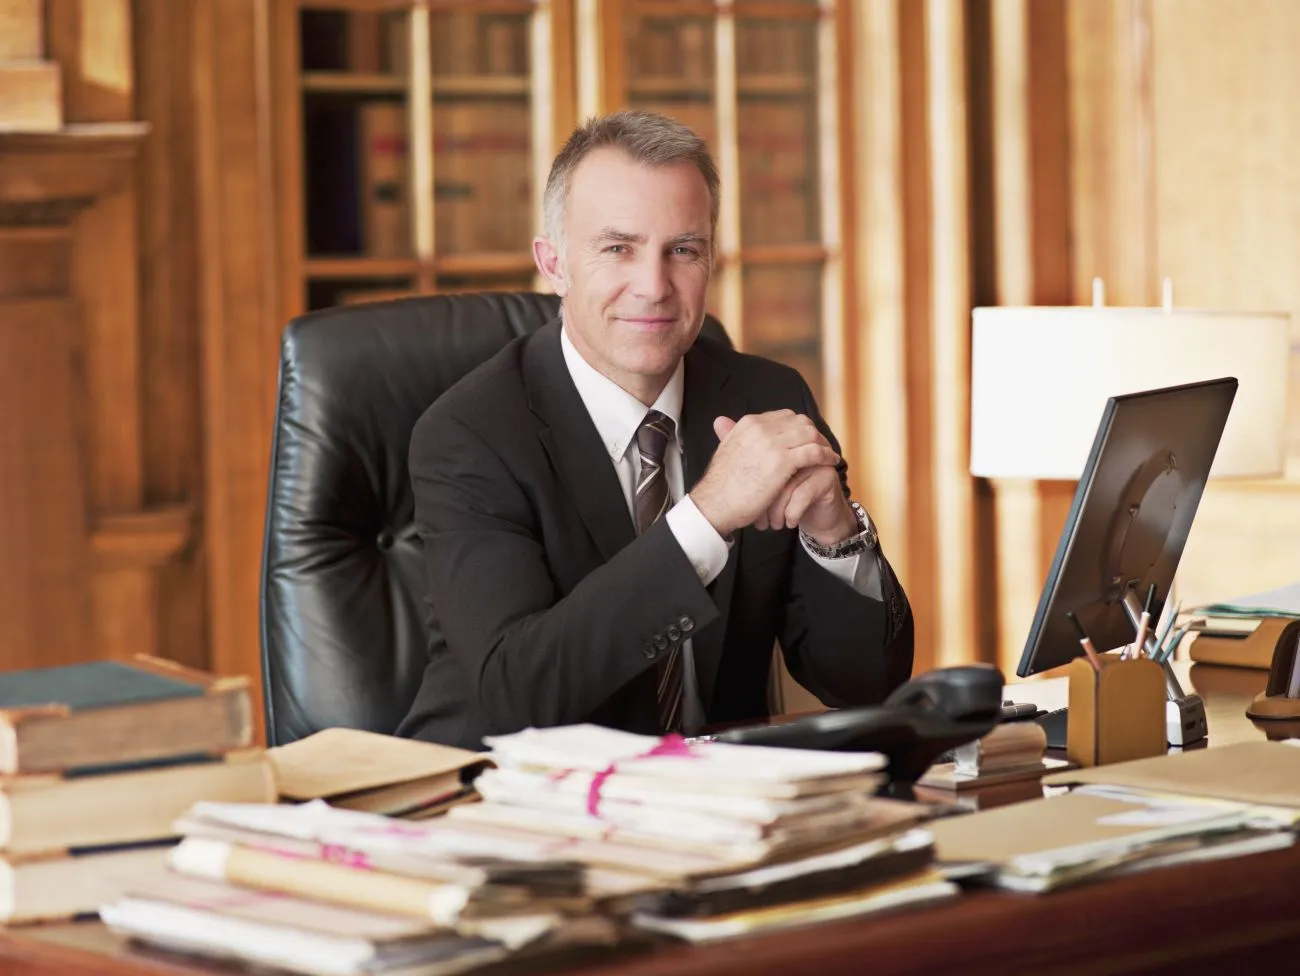 3 Reasons Why the Right Attorney Can Help You Win That Case